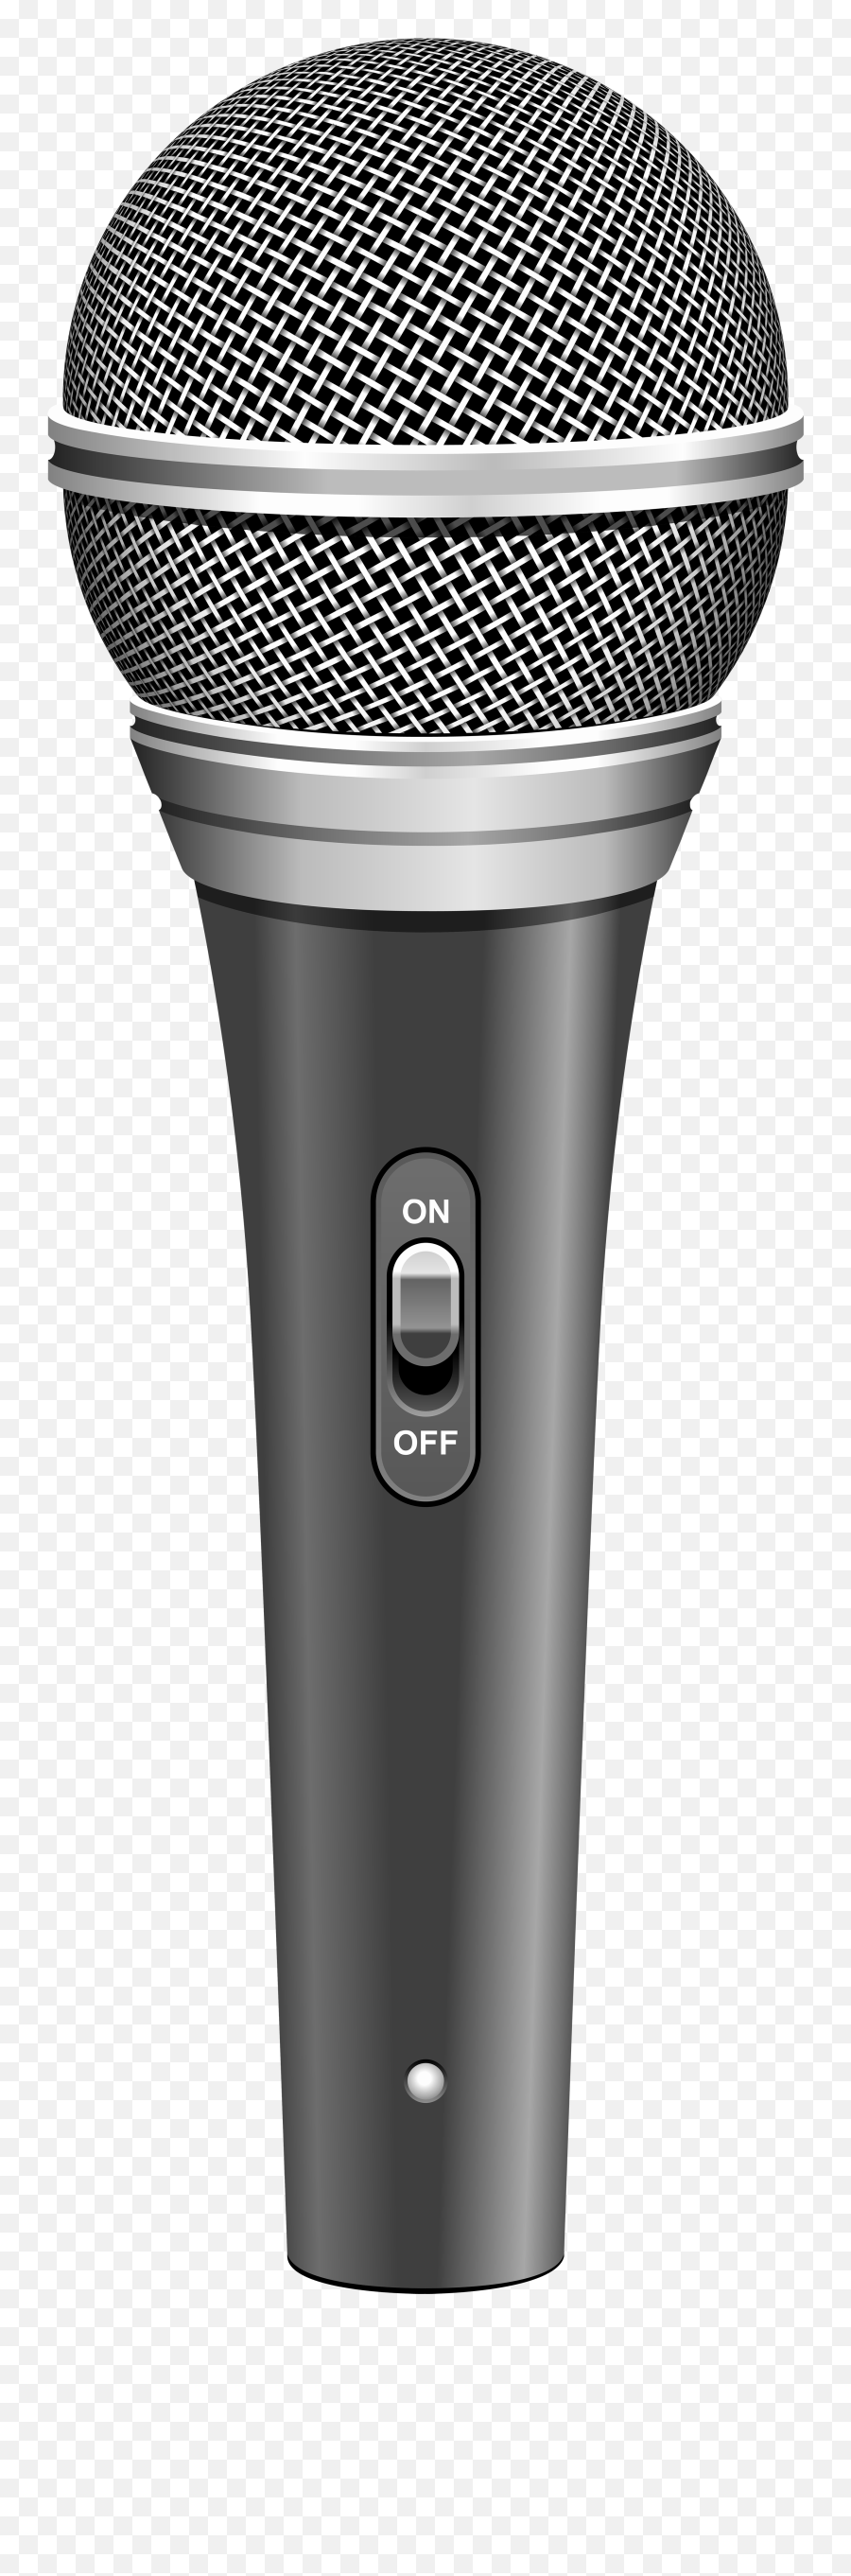 Microphone Transparent Png Clipart - Microphone,Microphone Png